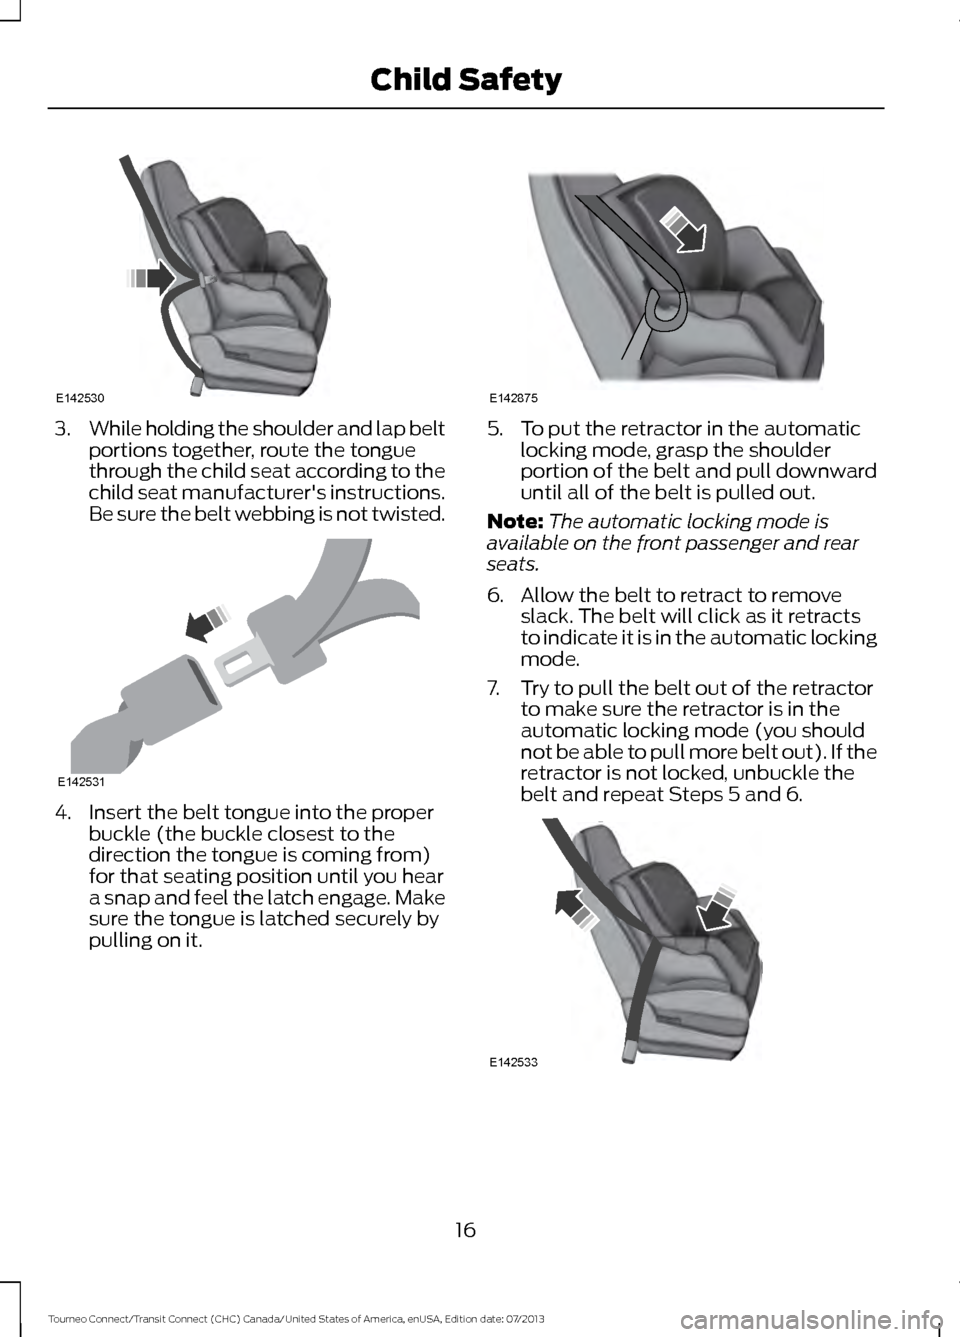 FORD TRANSIT CONNECT 2014 2.G Owners Manual 3.
While holding the shoulder and lap belt
portions together, route the tongue
through the child seat according to the
child seat manufacturers instructions.
Be sure the belt webbing is not twisted. 